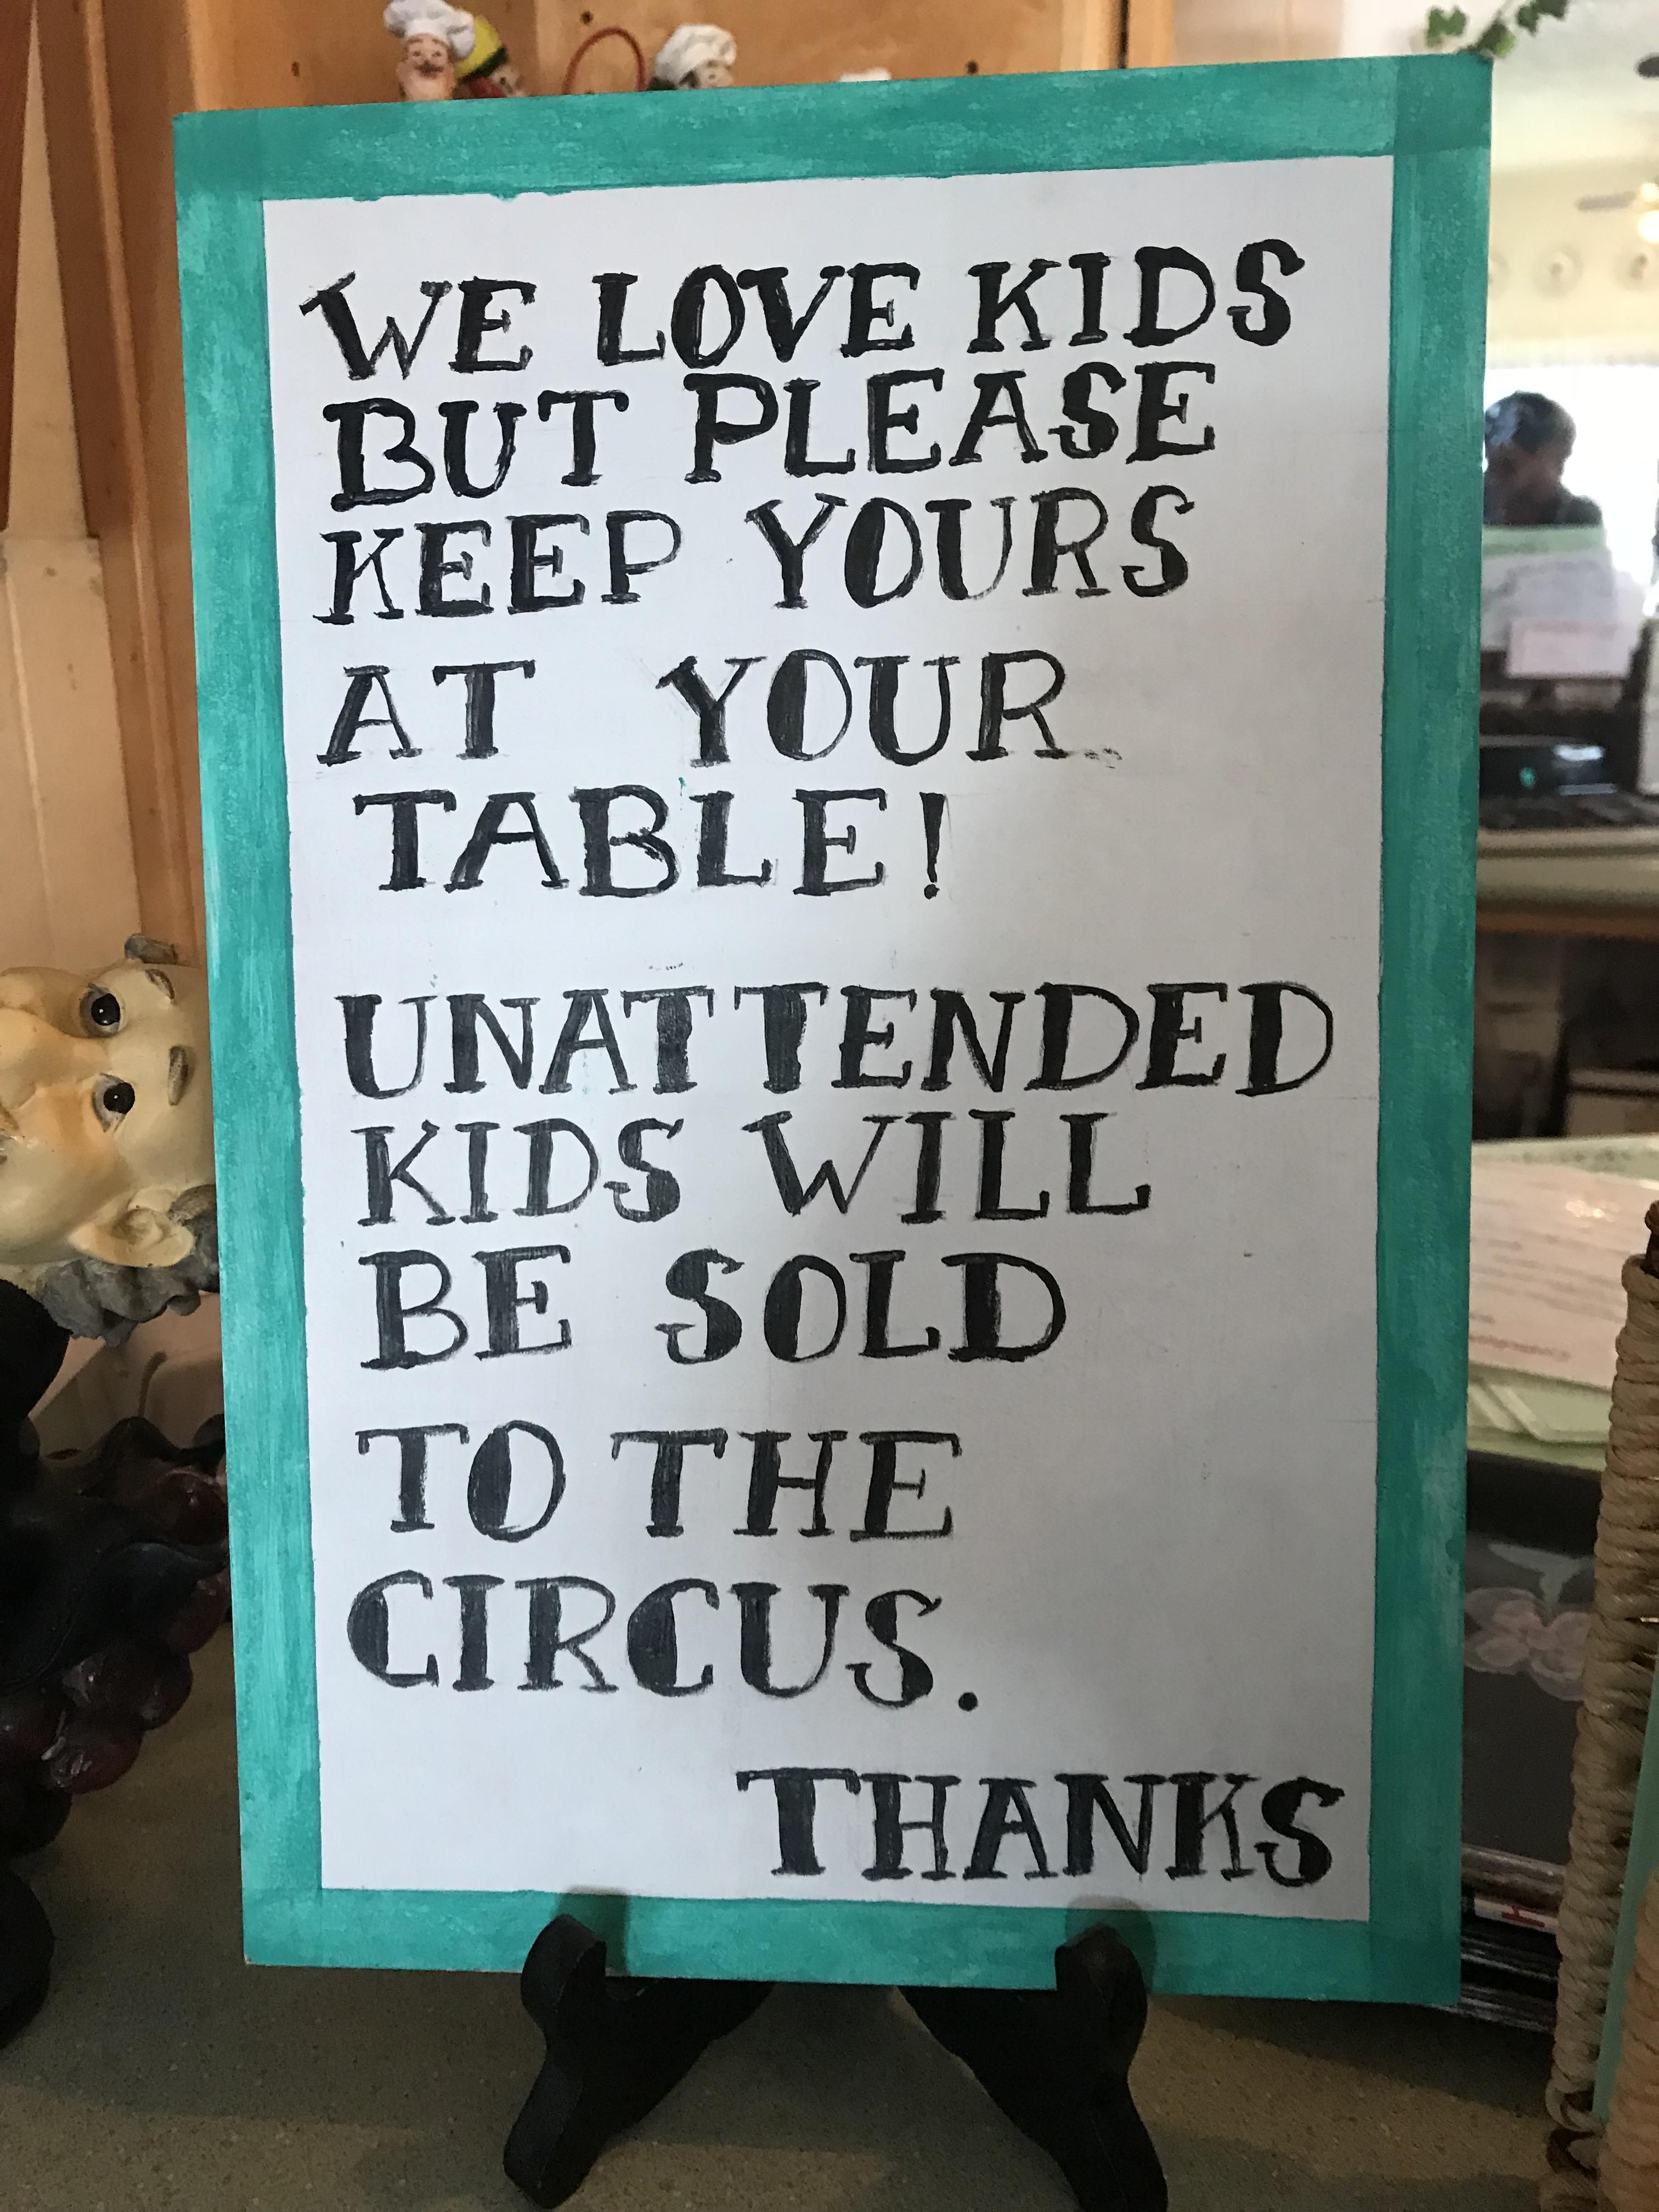 This sign we found at an Italian restaurant.